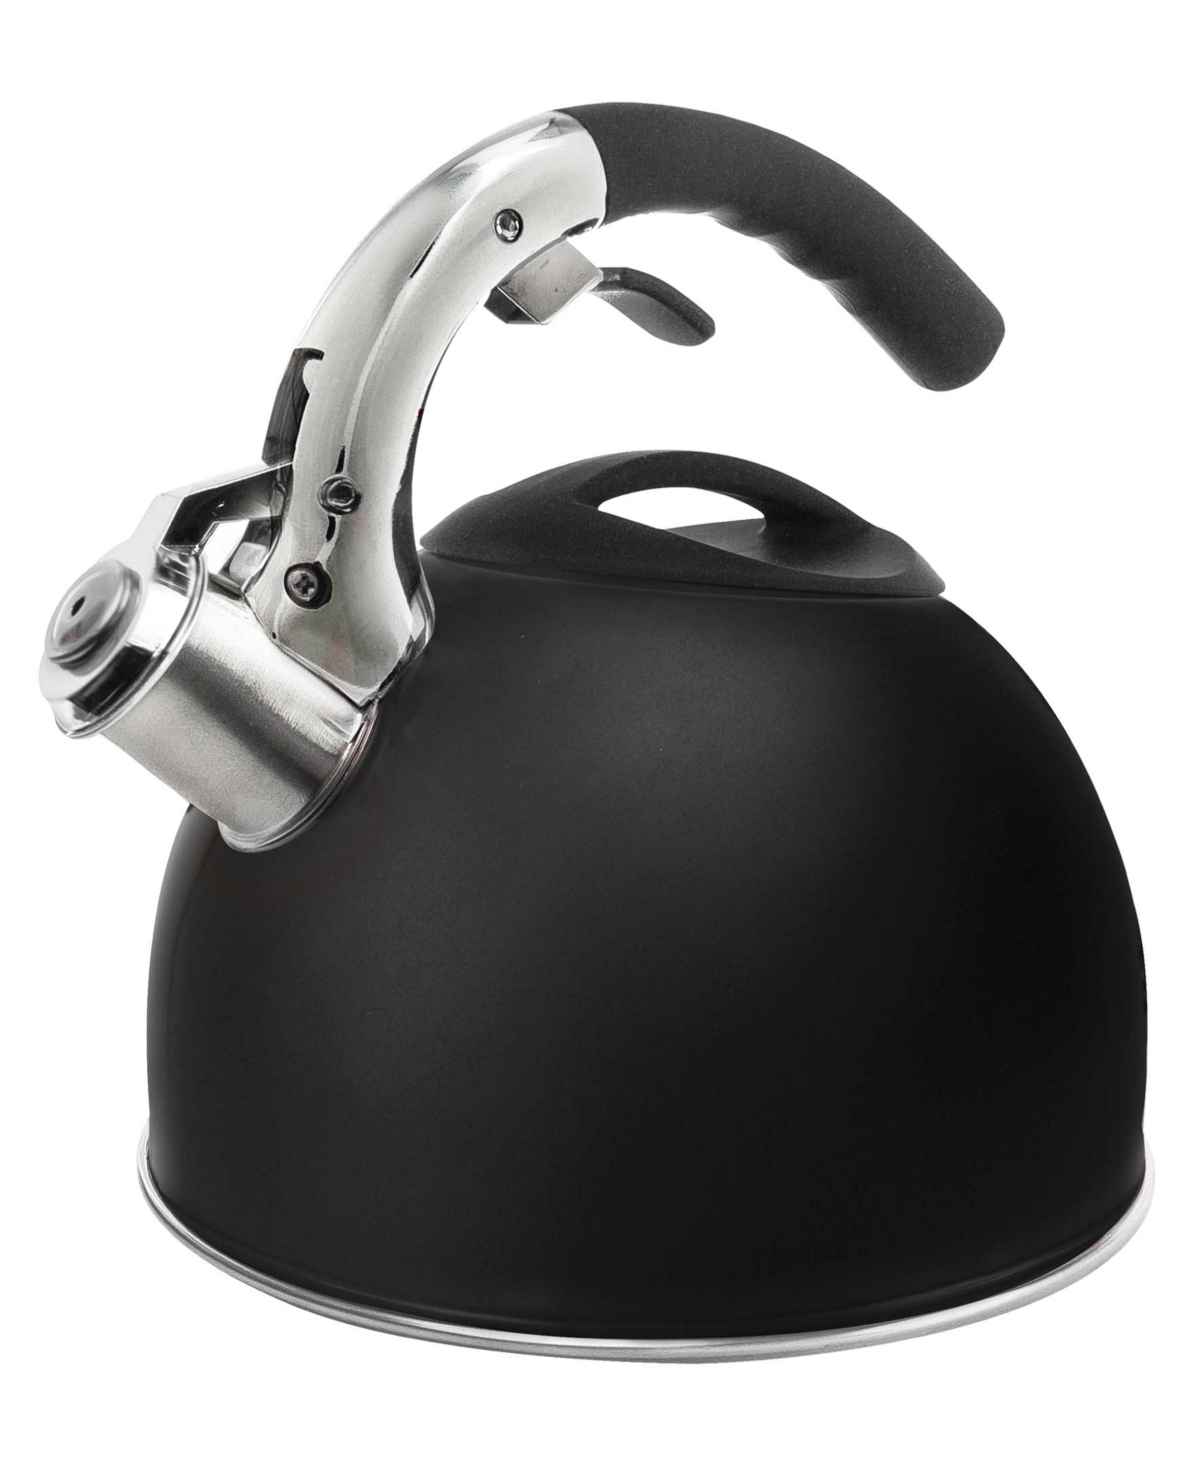 Primula Stainless Steel 3 Quart Tea Kettle With Soft Grip Silicone Handle In Black